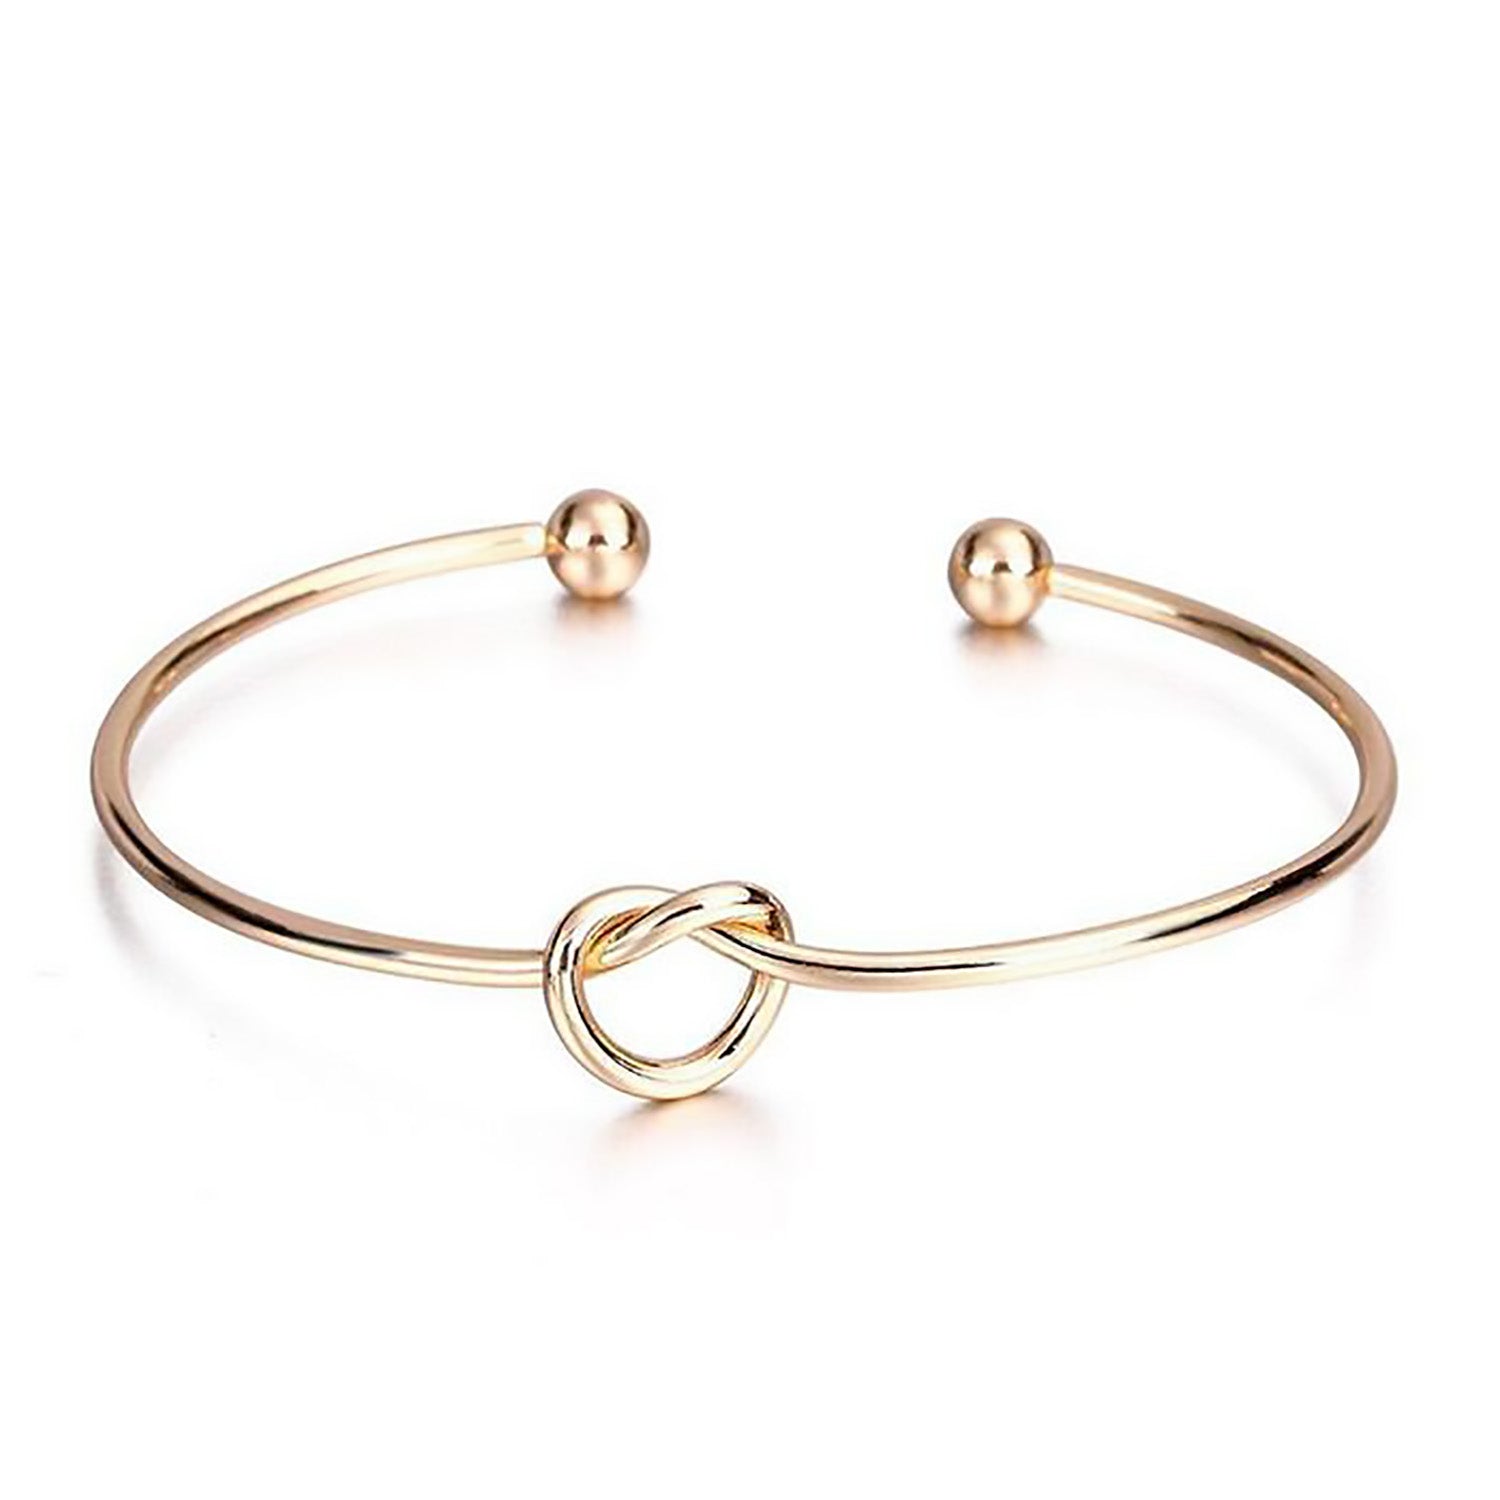 Silver Plated 3-Pack Knot Bangles